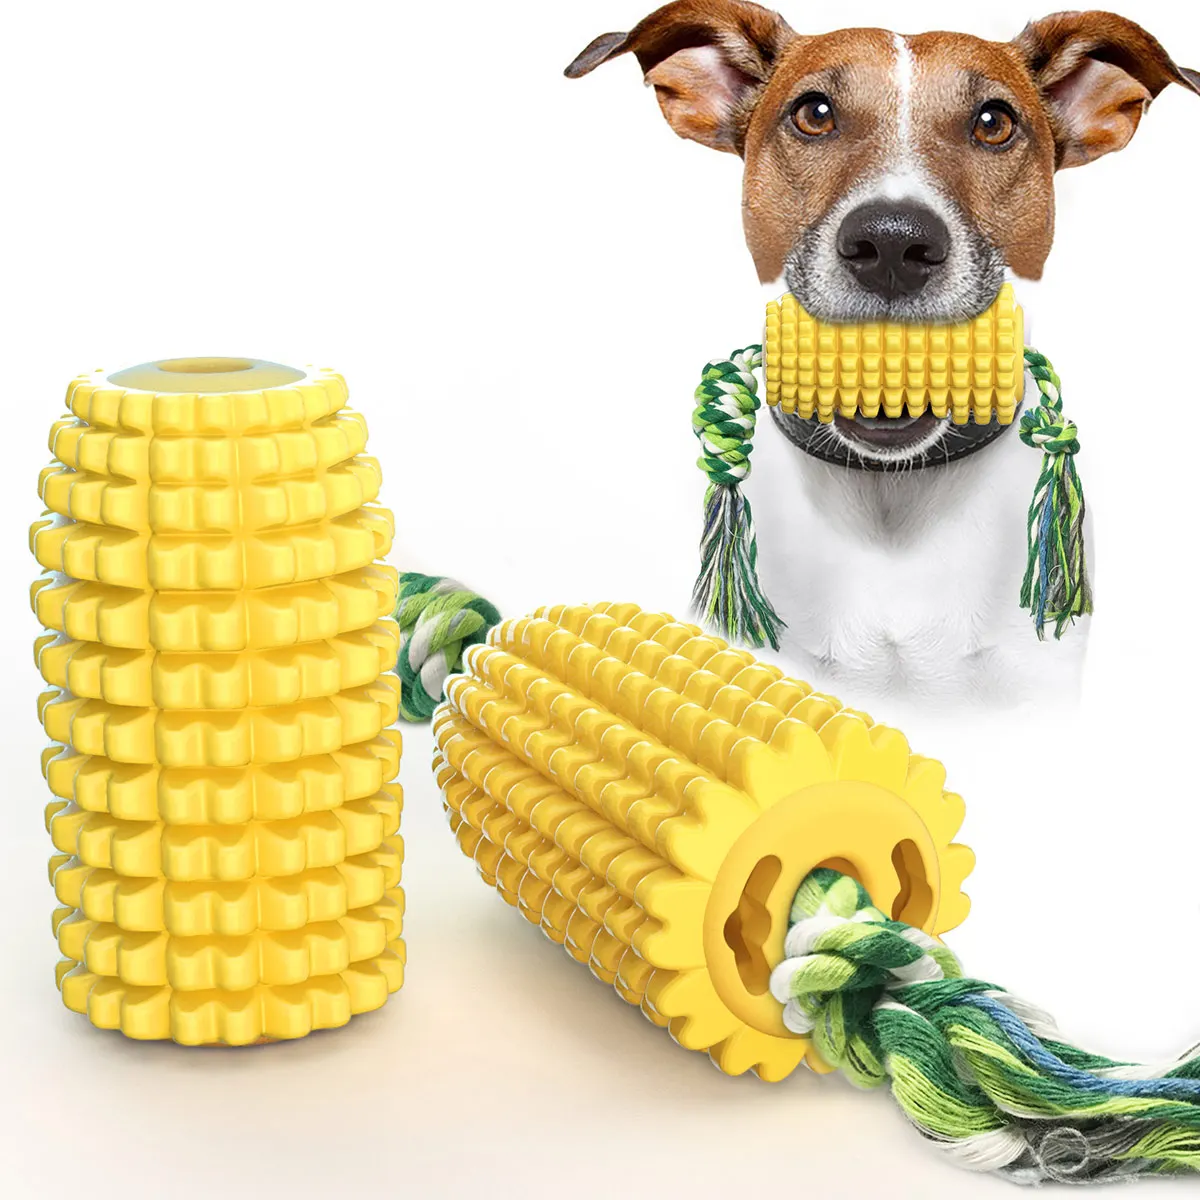 

Amazon hot sale Eco friendly pet dog teeth cleaning durable 360 corn shape dog chew toy toothbrush stick, Yellow